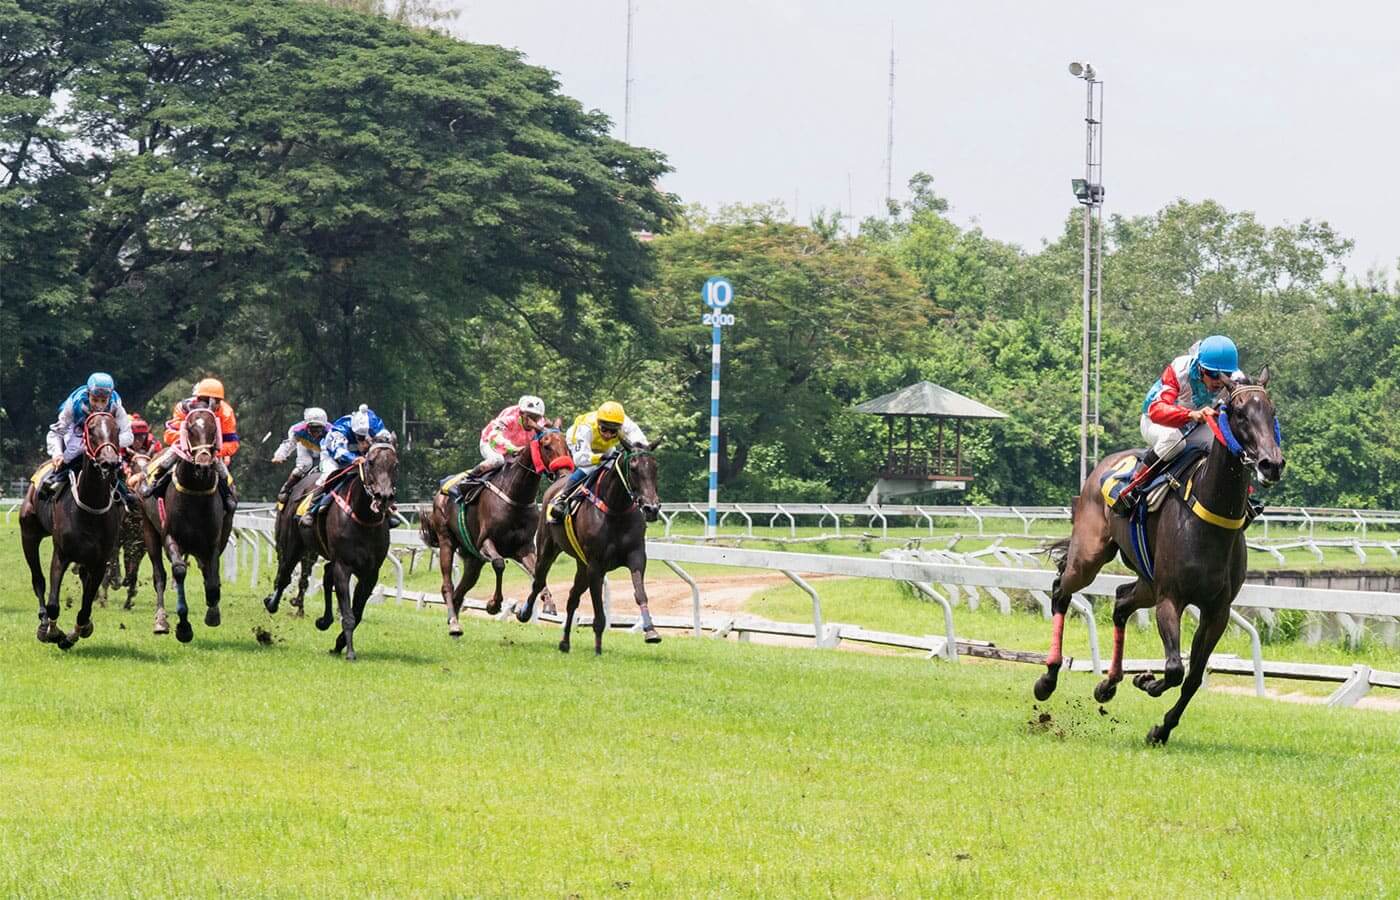 A high speed horse race with a jockey in the lead